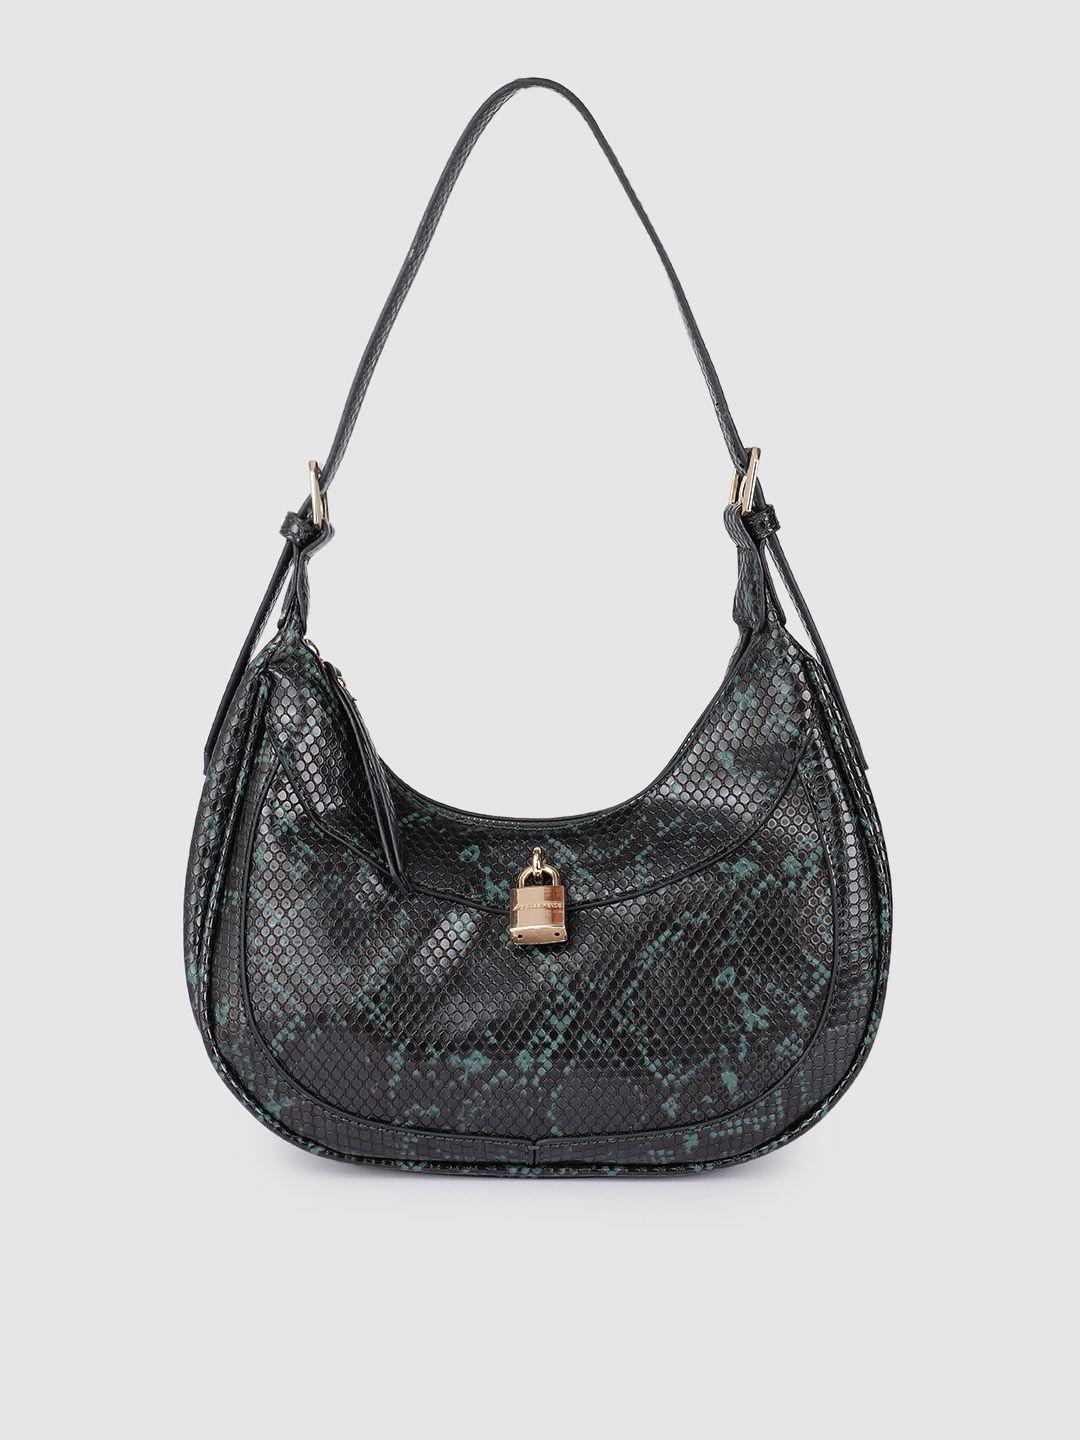 accessorize-teal-green-&-black-textured-structured-hobo-bag